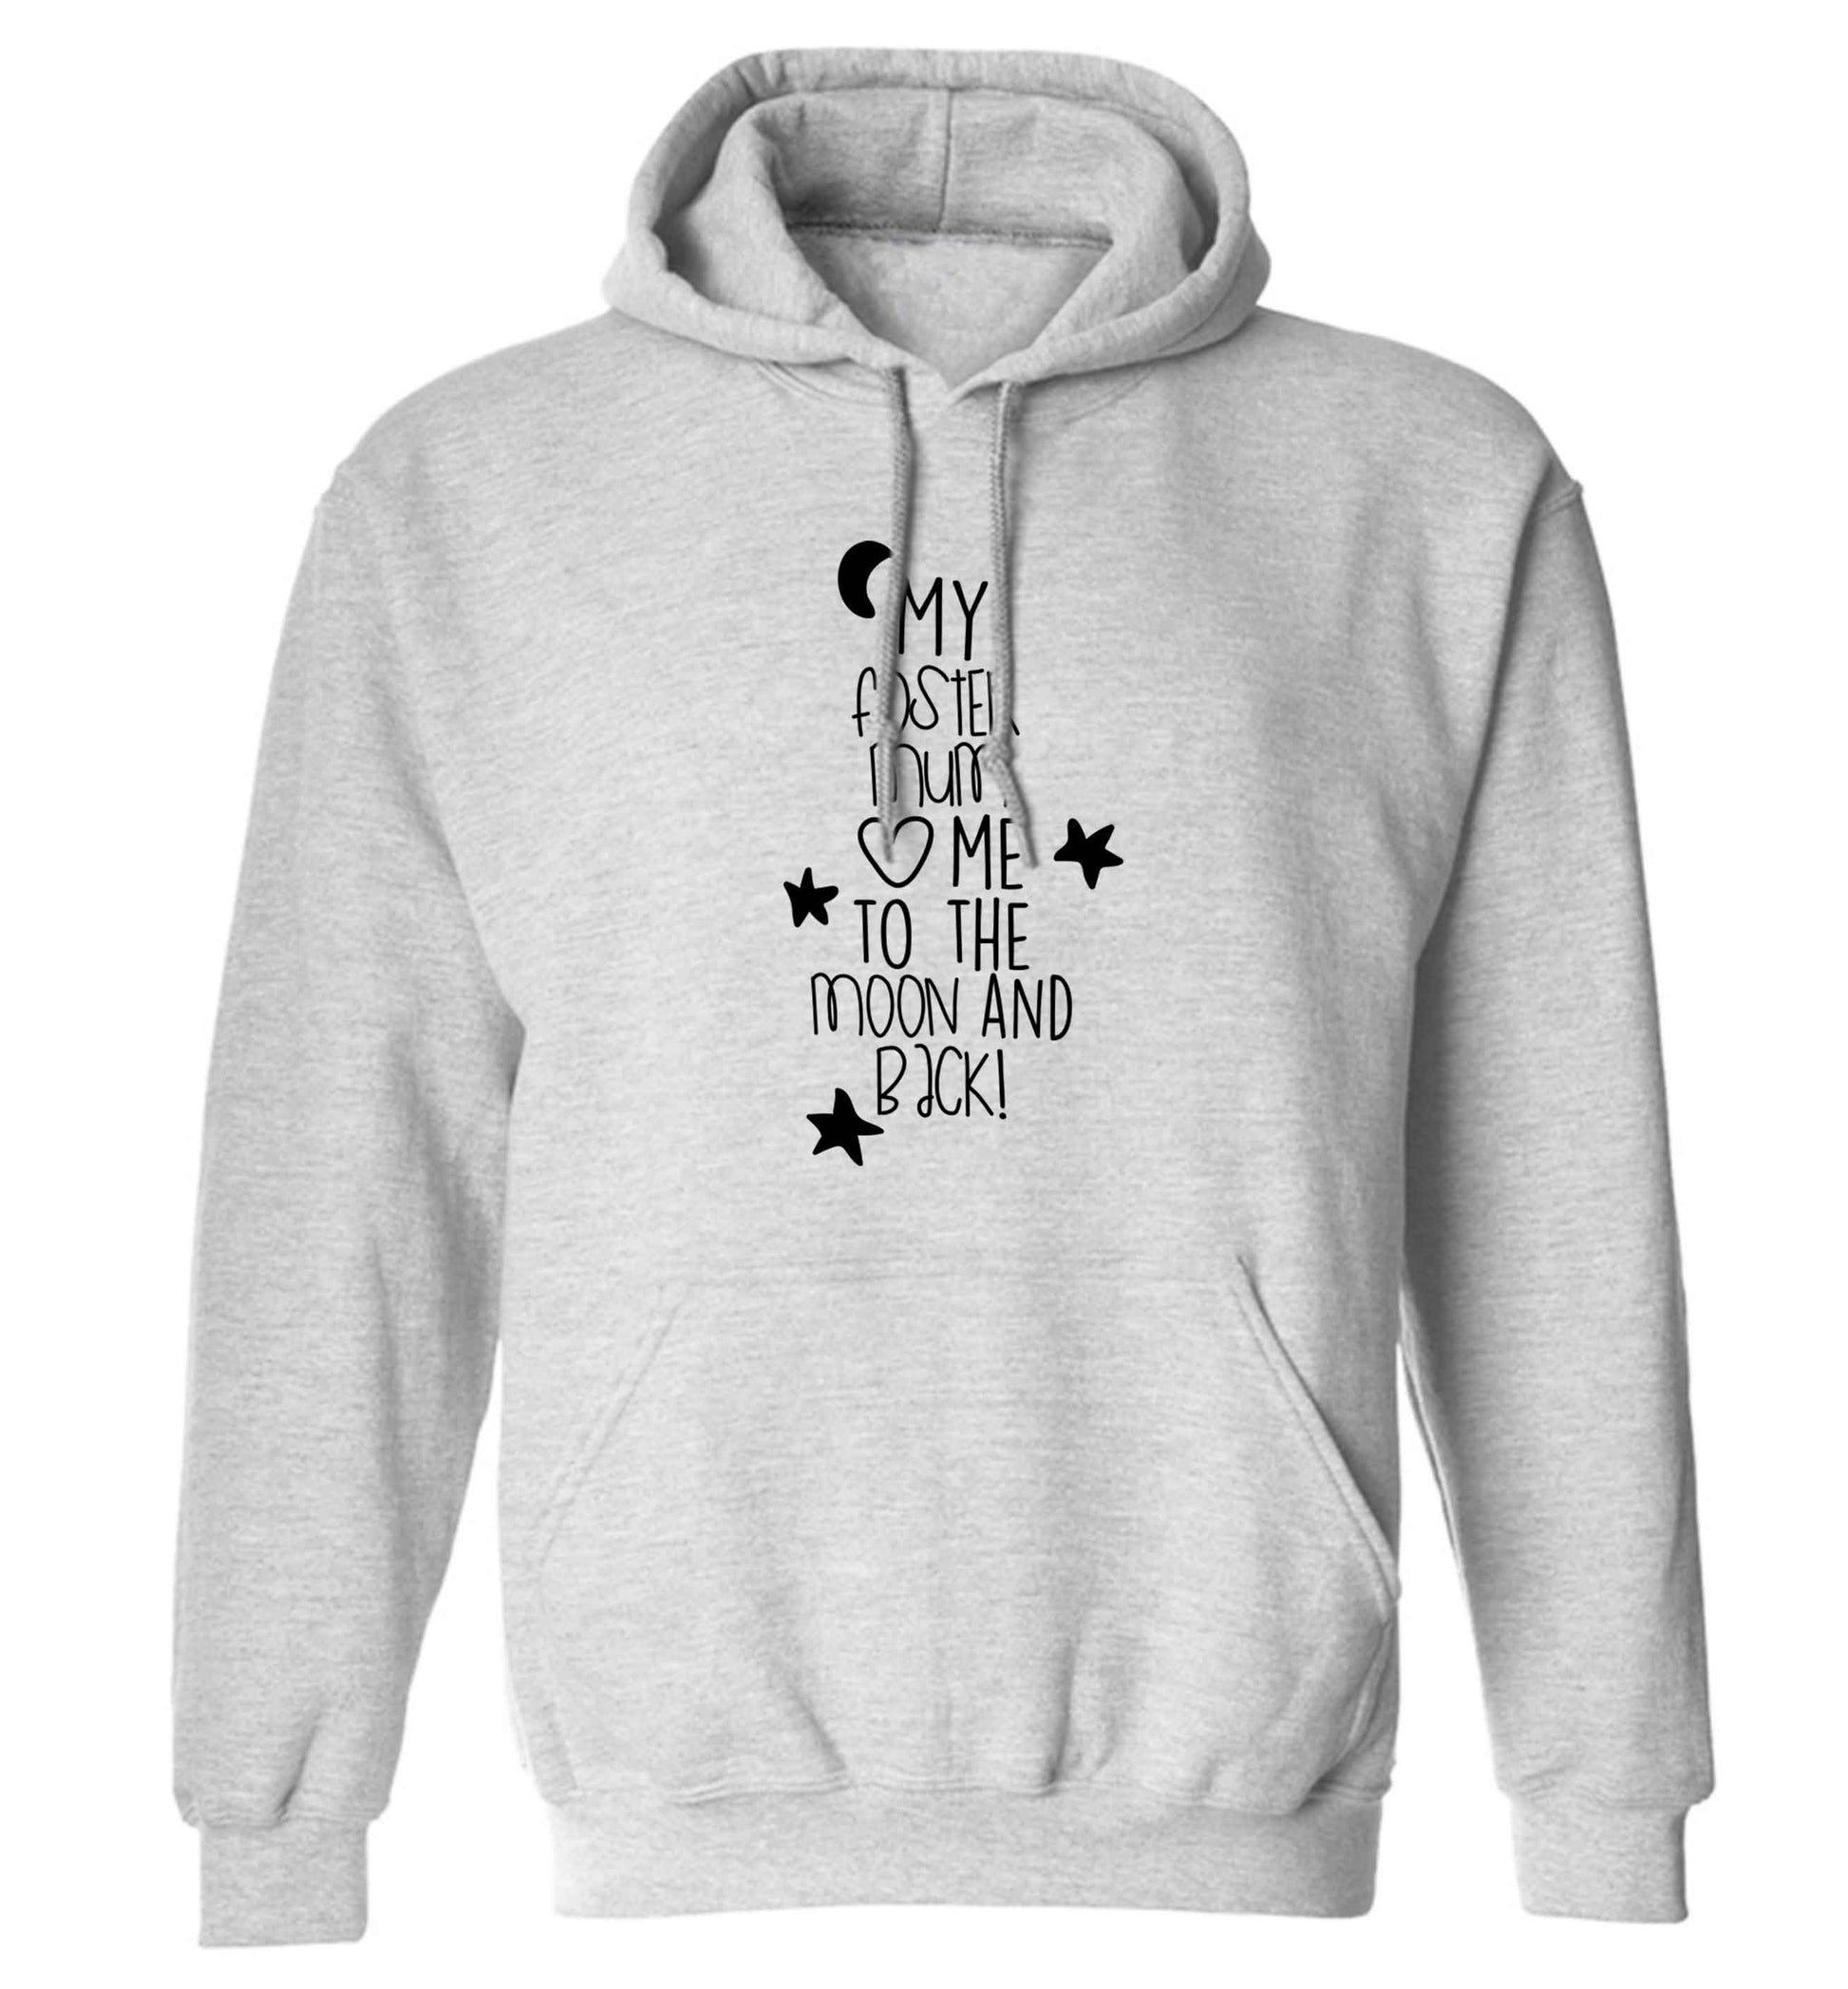 My foster mum loves me to the moon and back adults unisex grey hoodie 2XL